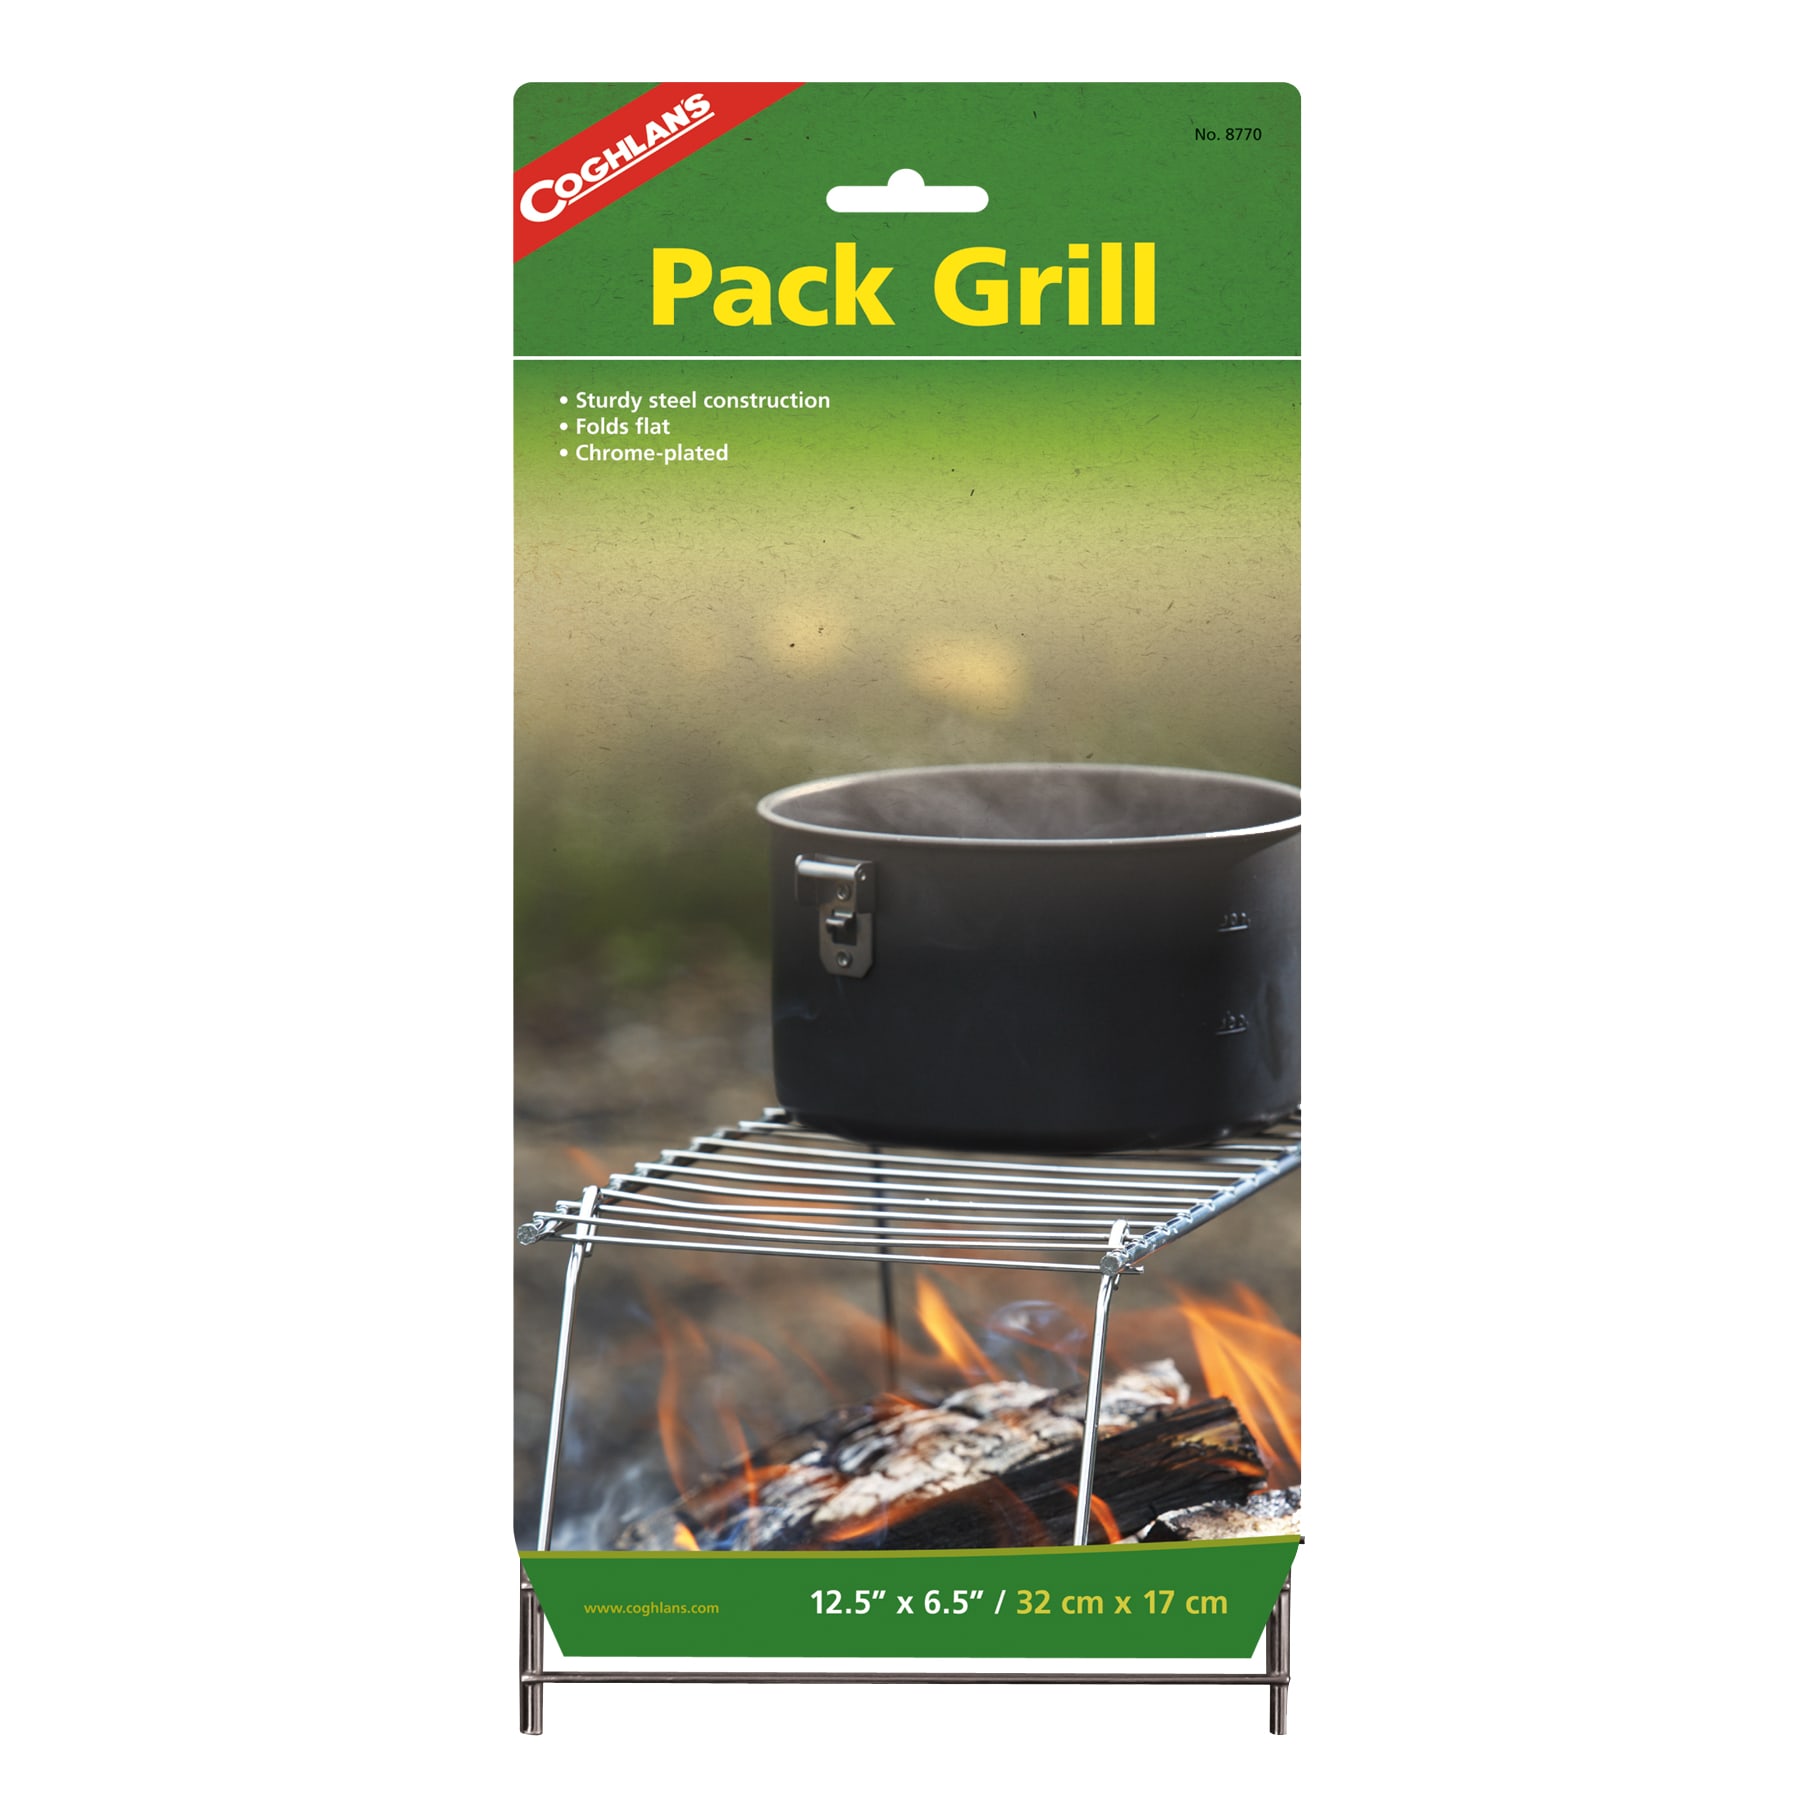 Coghlan's Pack Grill